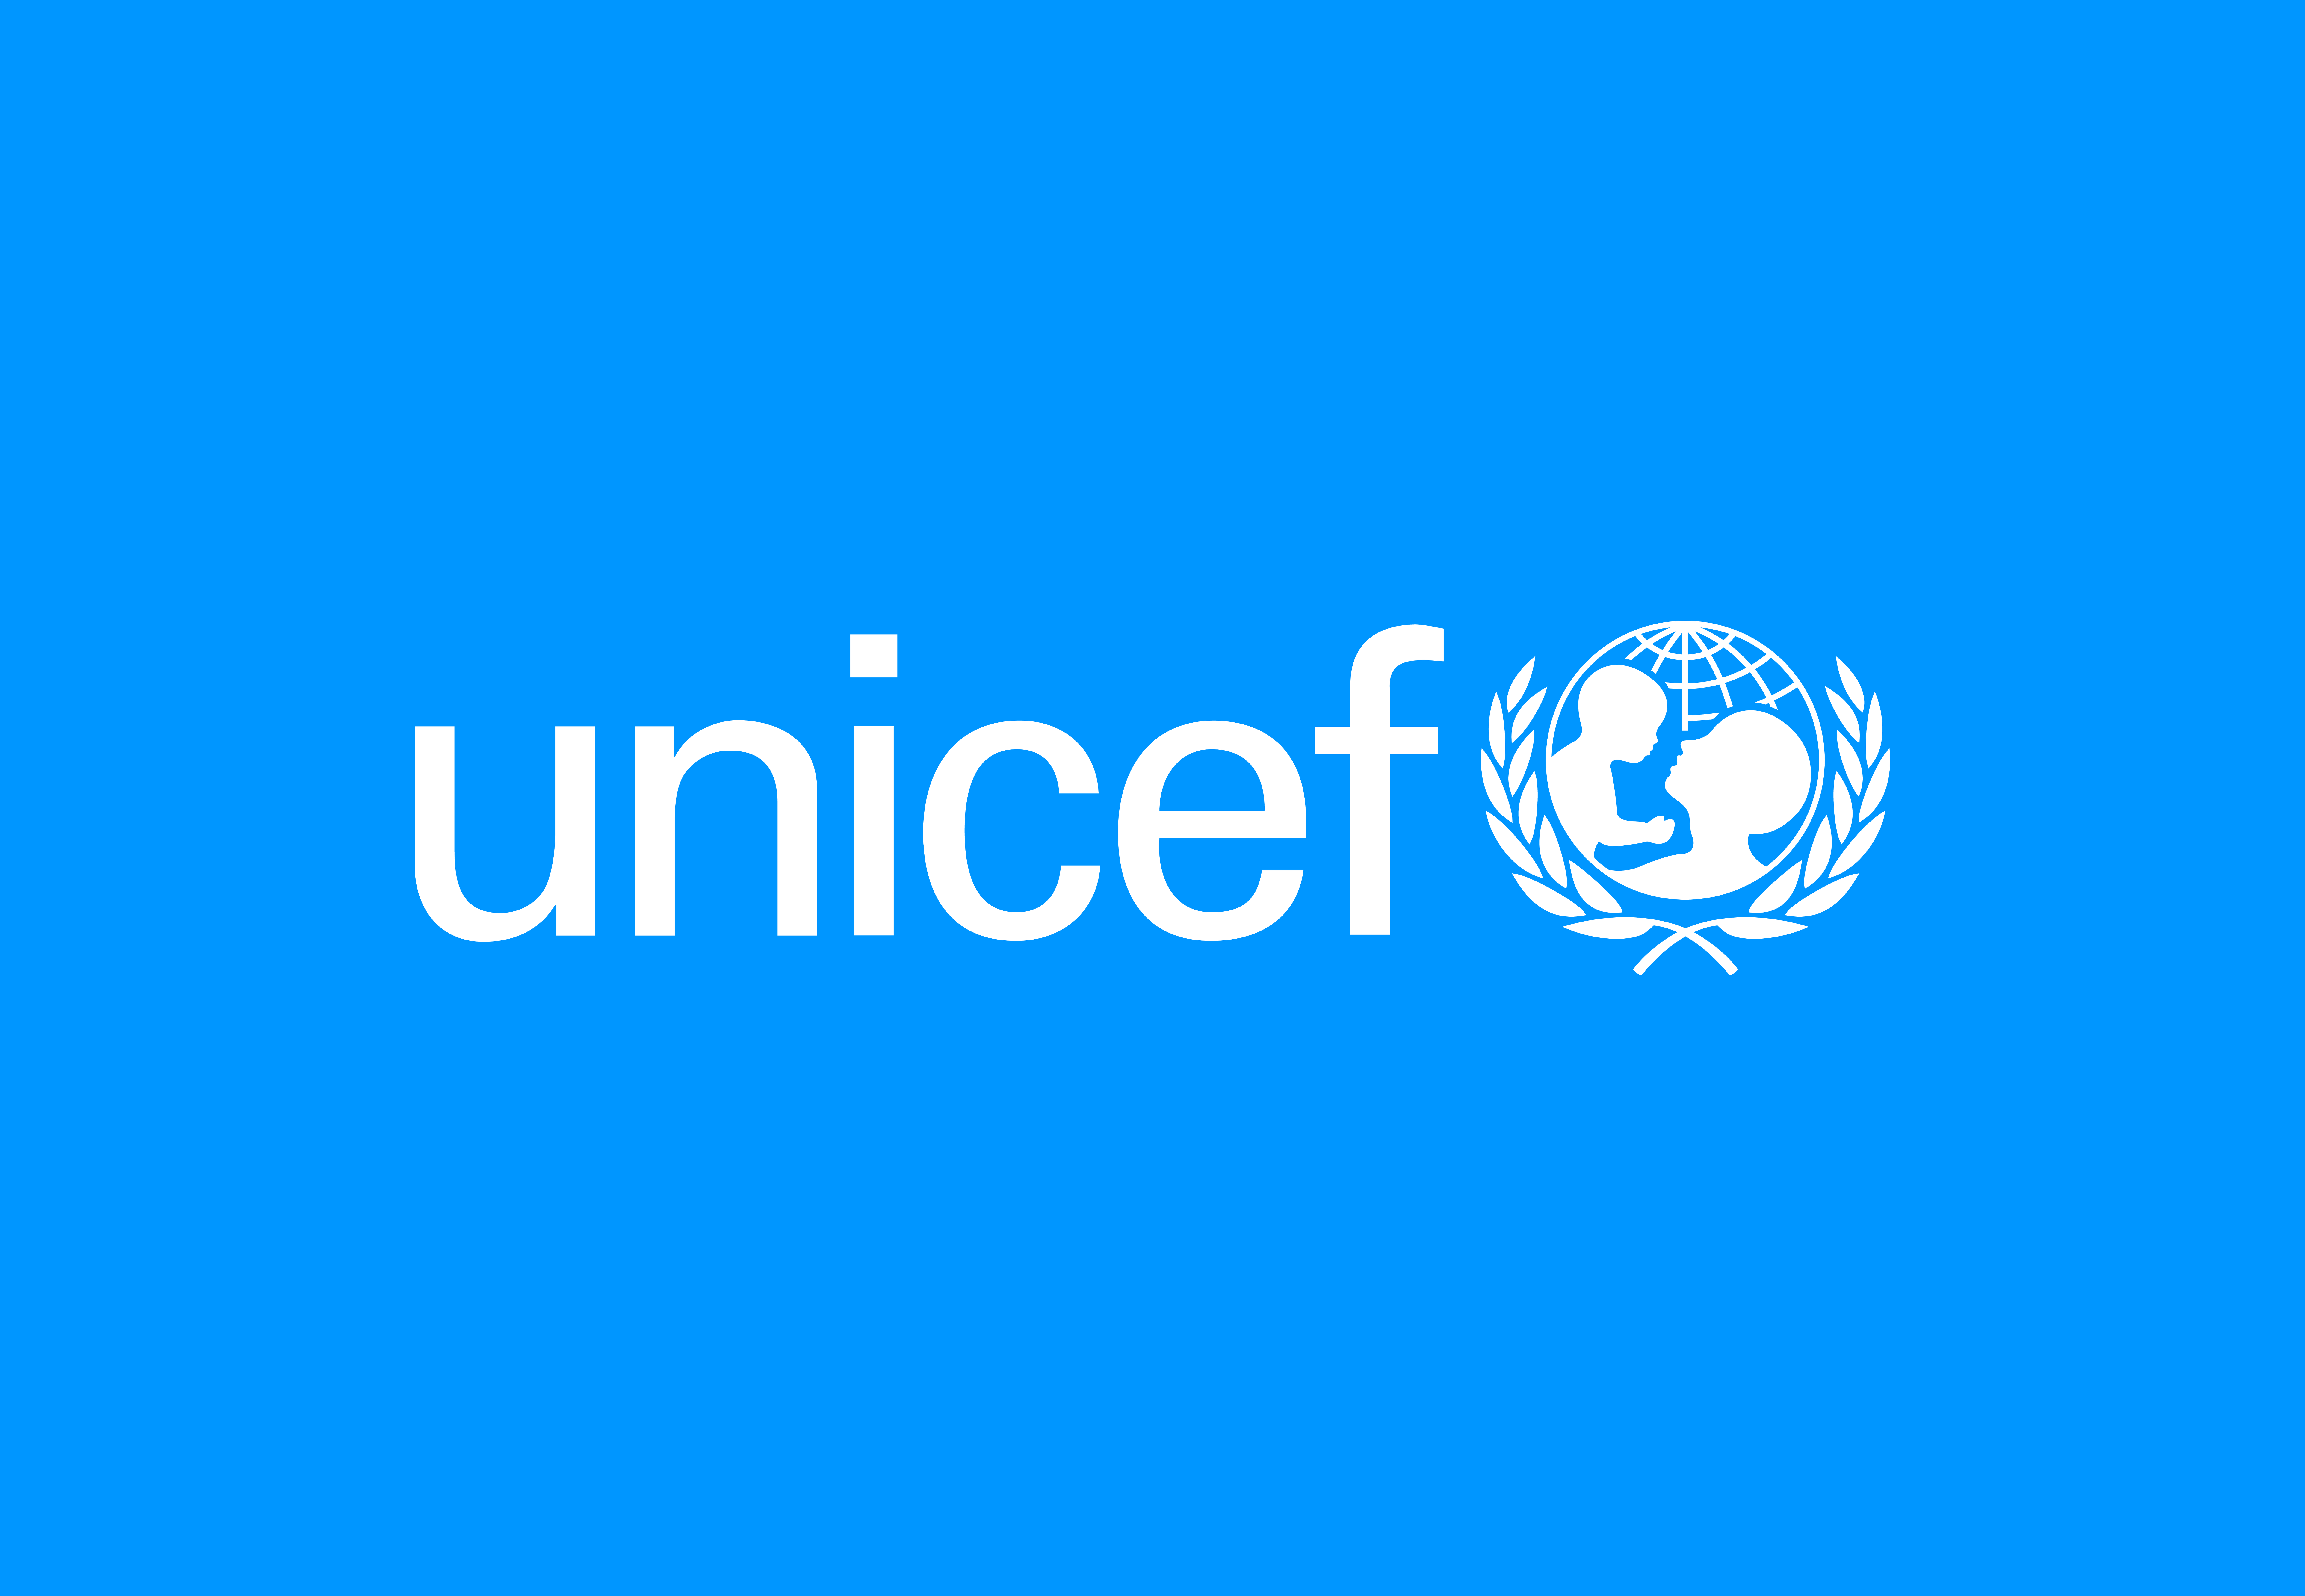 How Ethereum managed to get UNICEF to endorse blockchain